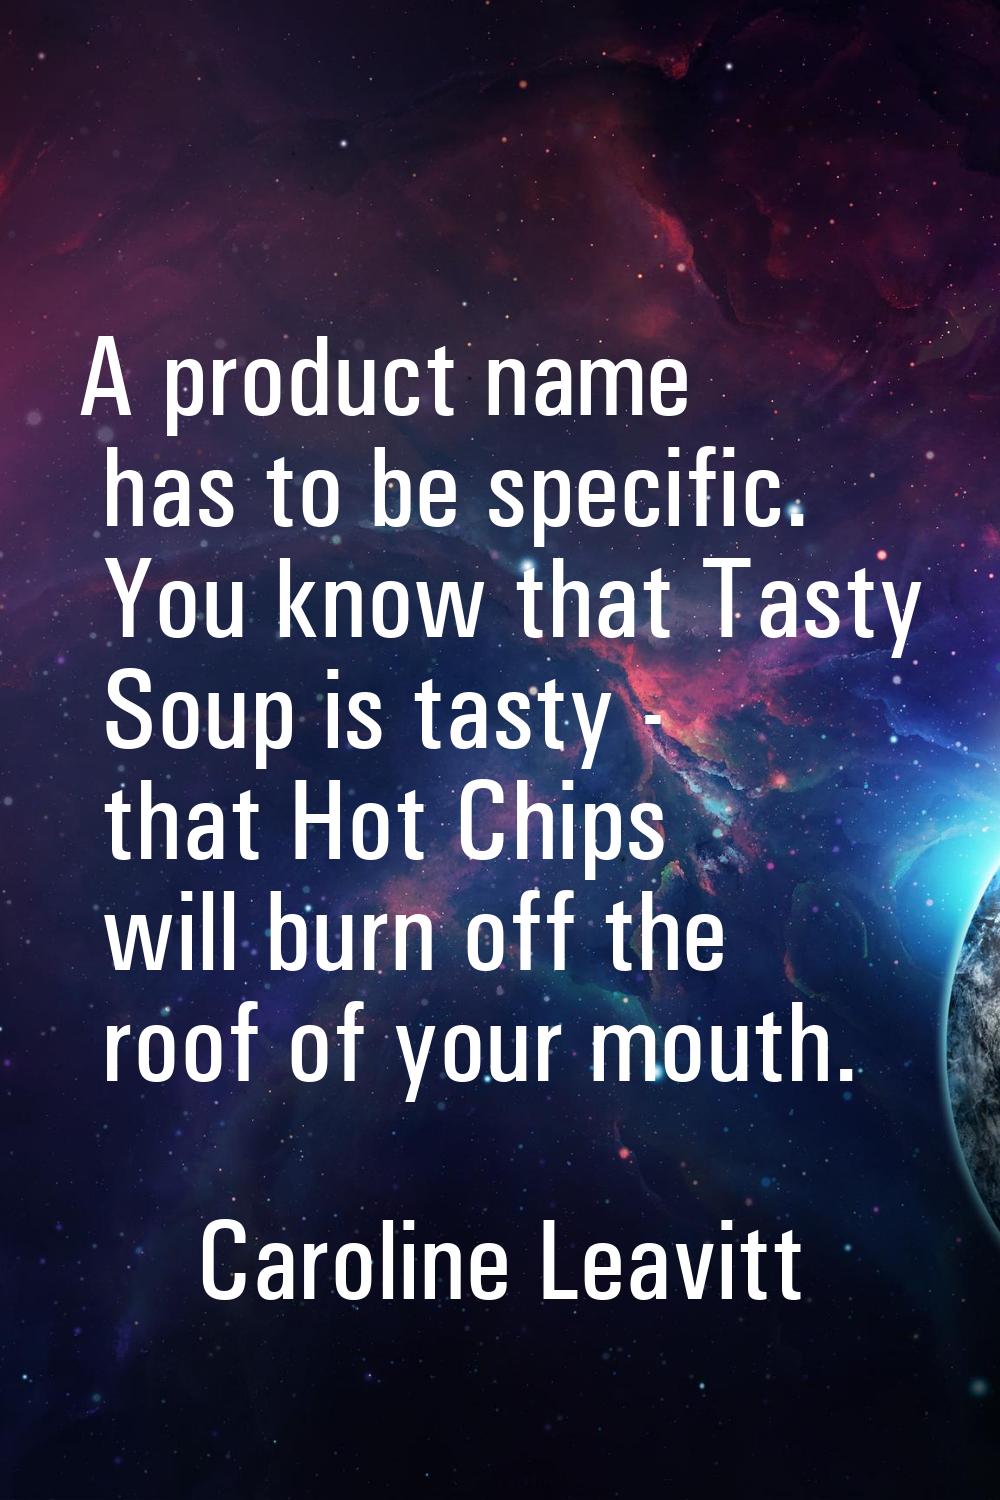 A product name has to be specific. You know that Tasty Soup is tasty - that Hot Chips will burn off